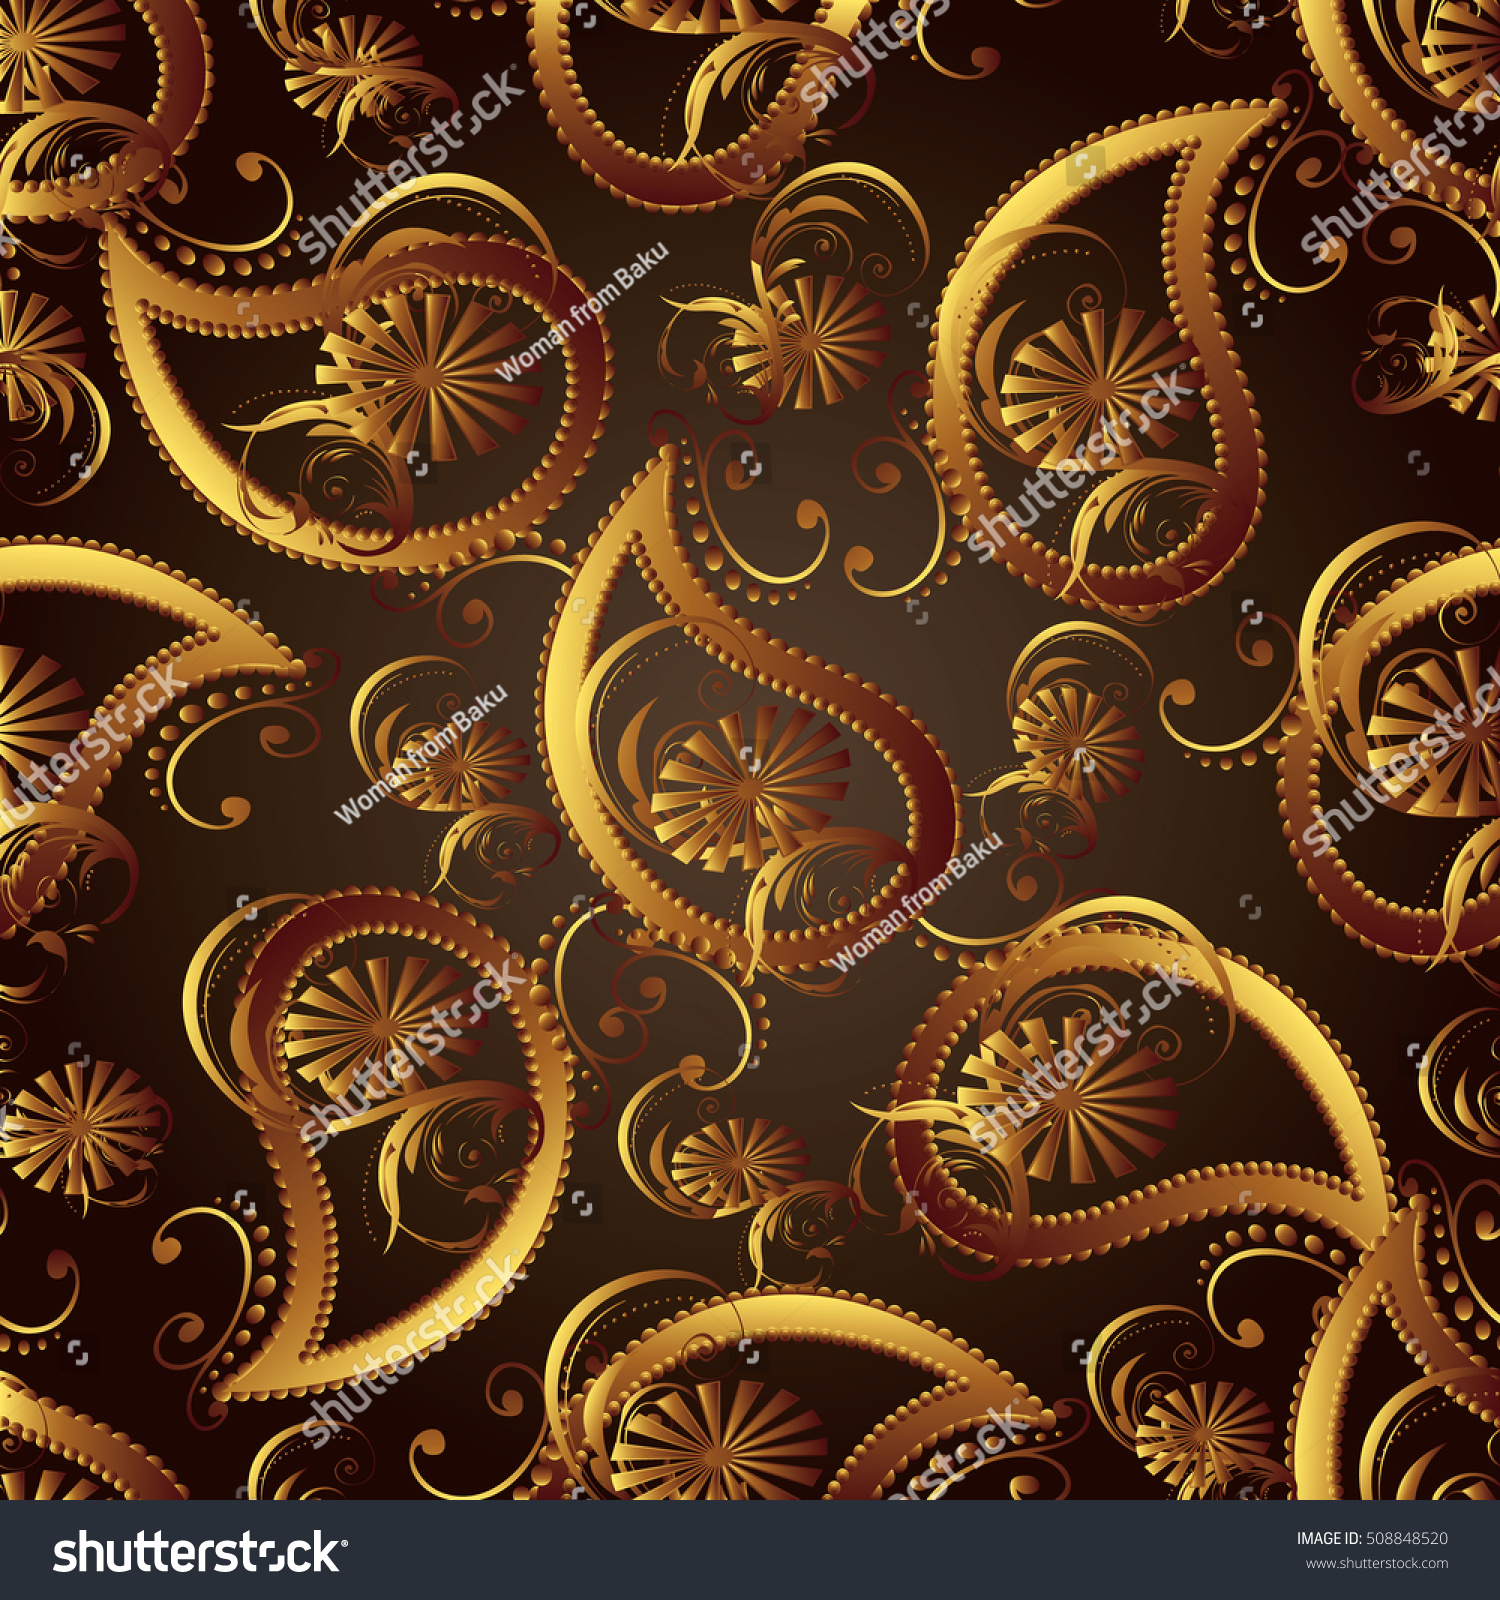 Paisley Floral Brown Vector Seamless Pattern Stock Vector ...